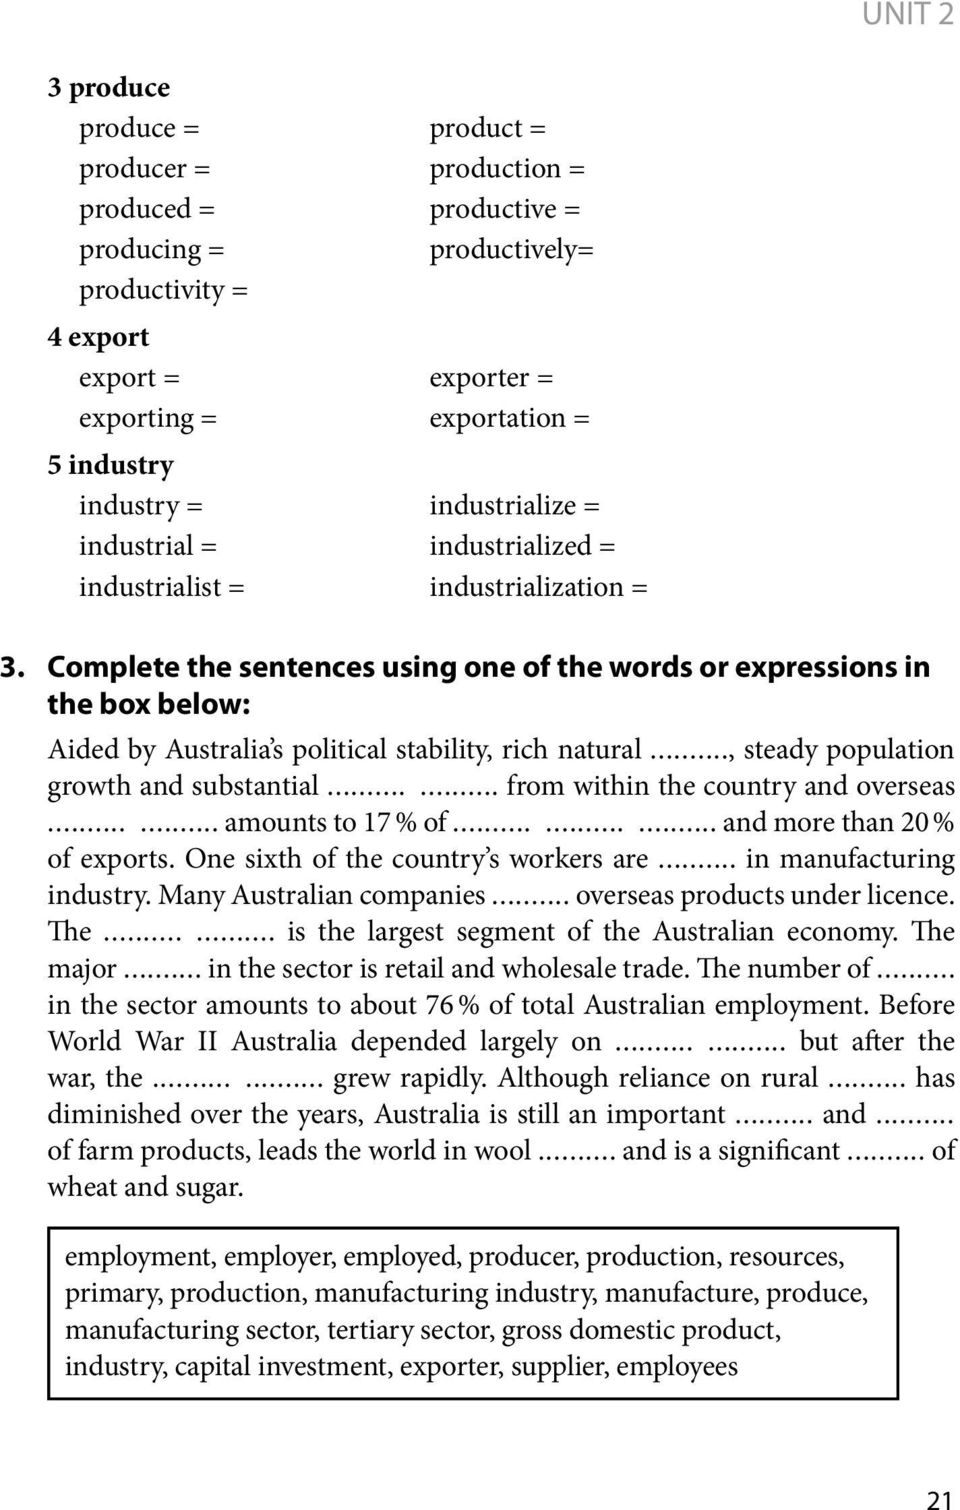 Complete the sentences using one of the words or expressions in the box below: Aided by Australia s political stability, rich natural..., steady population growth and substantial.